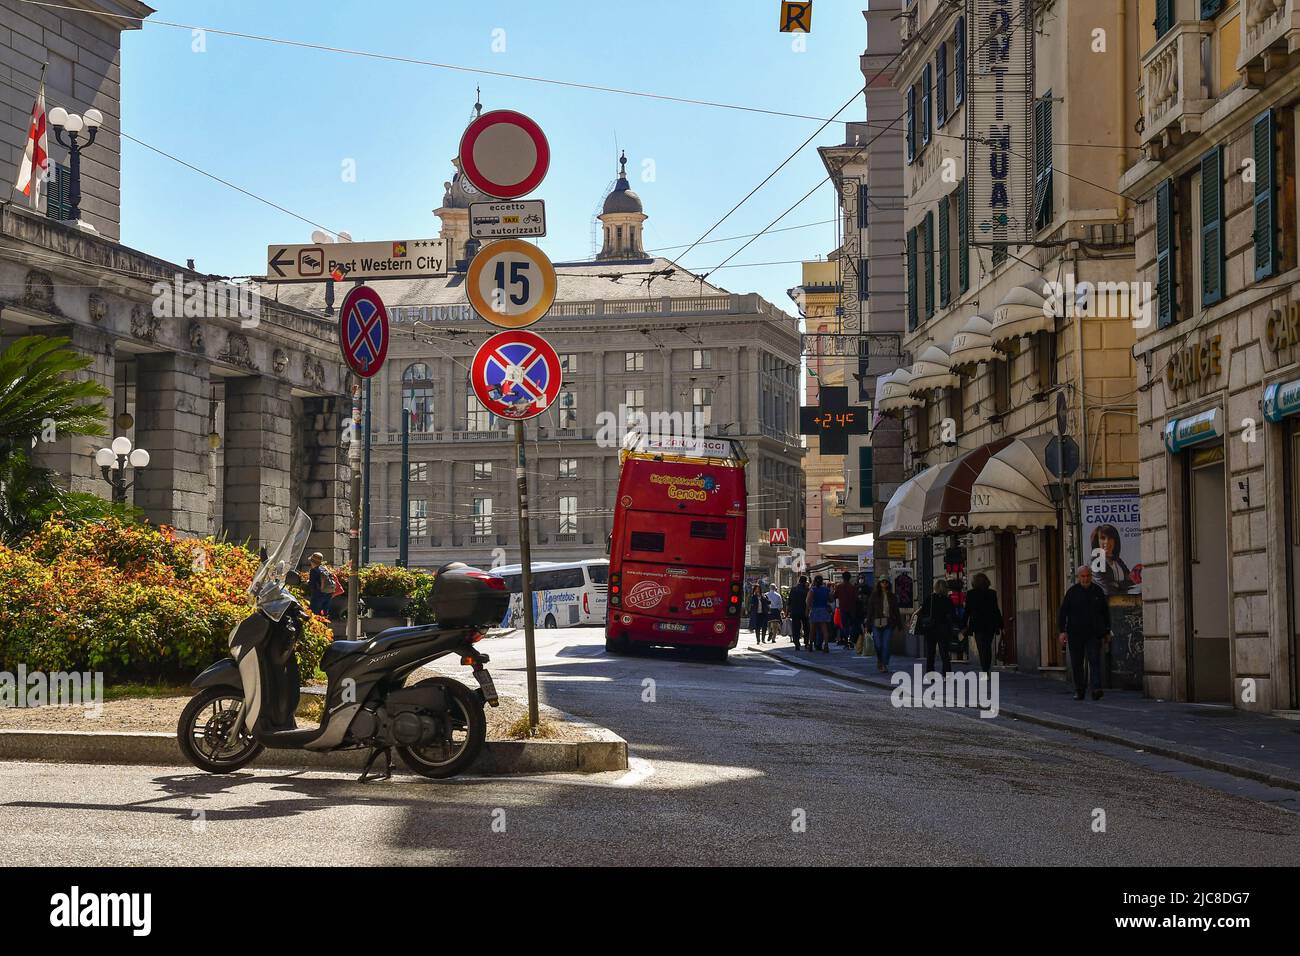 A sightseeing bus arriving in Piazza De Ferrari, one of the main square of Genoa, with the Carlo Felice Theatre and the Liguria Region palace, Italy Stock Photo